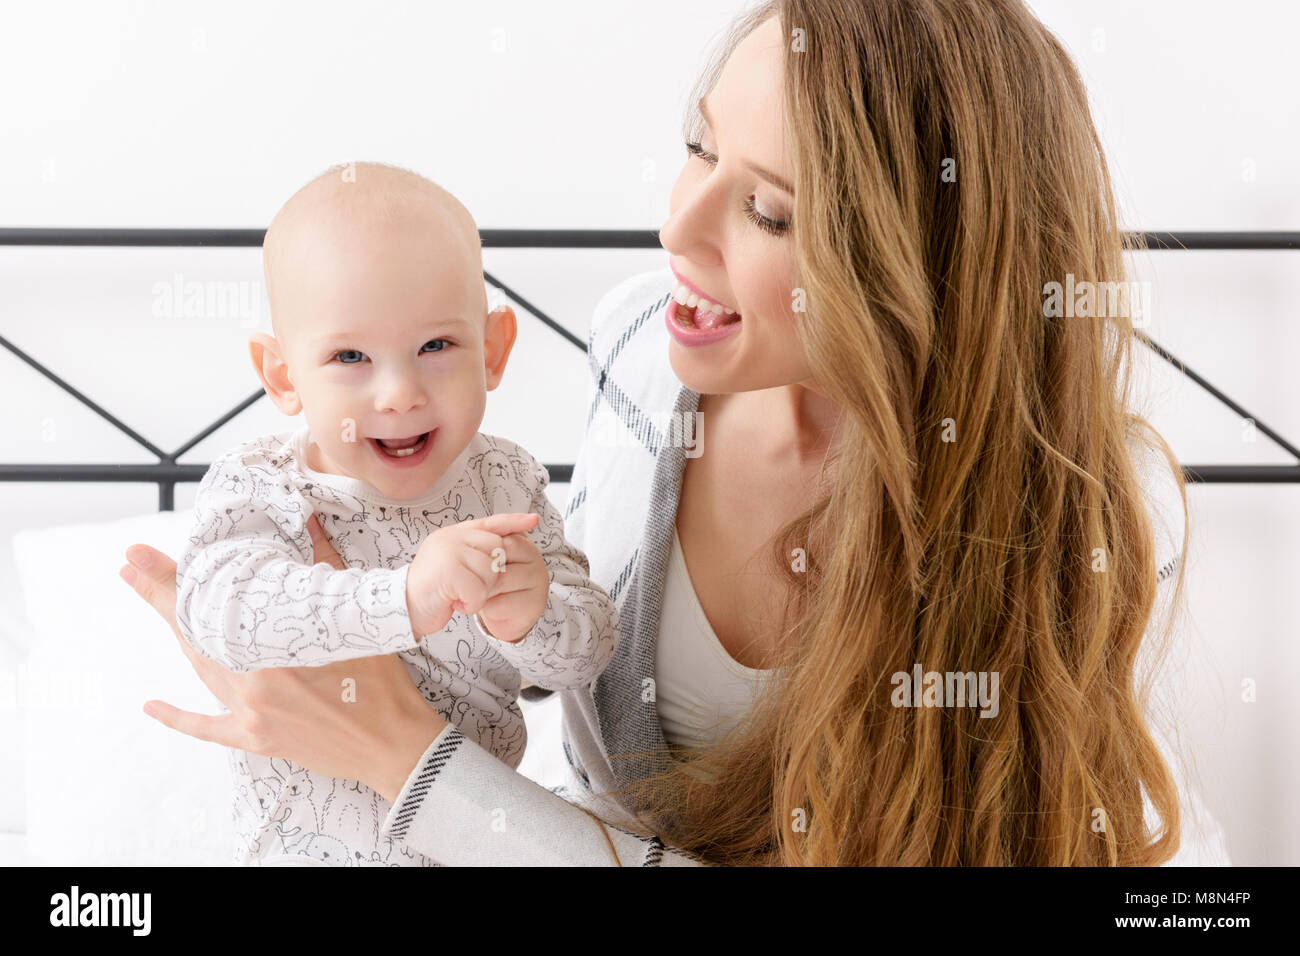 Happy mother and her baby son playing on a bed together. Happy family. Mother and newborn child portrait. Stock Photo